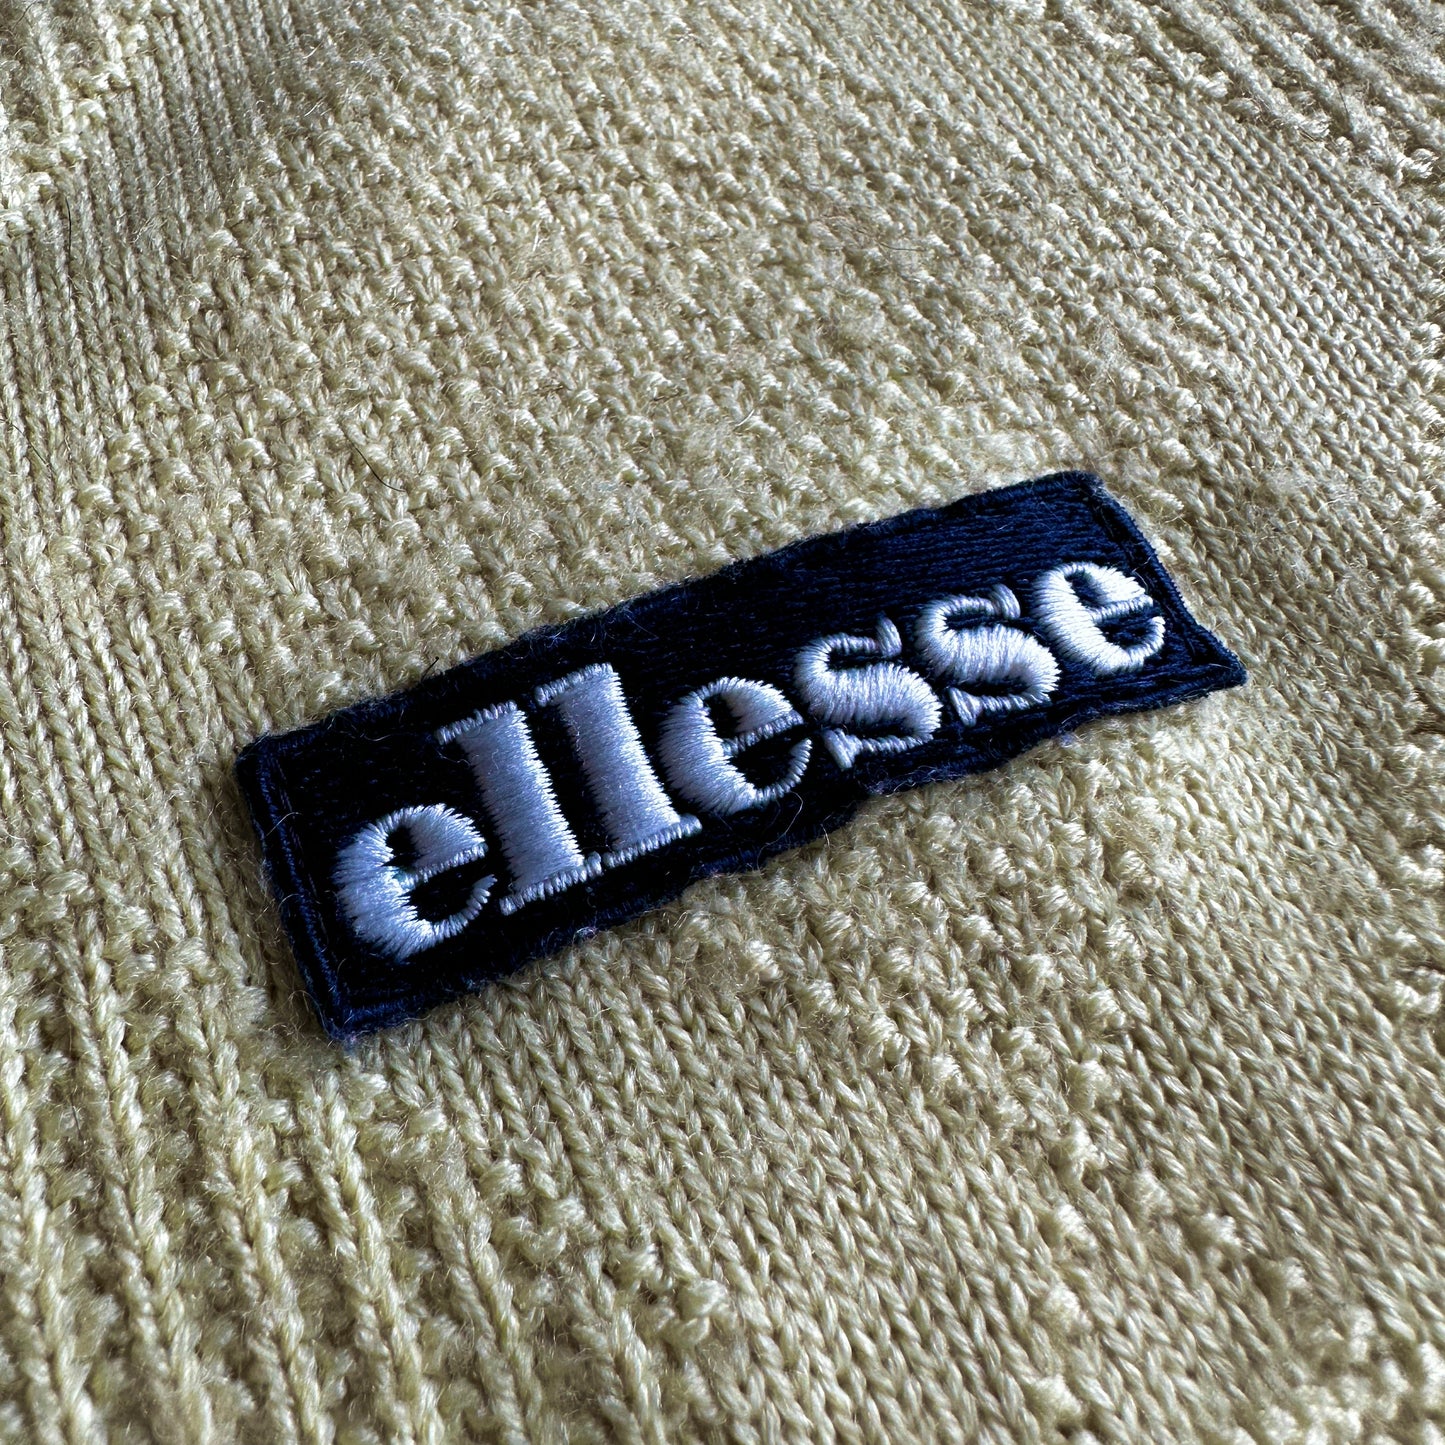 Ellesse 80s Vintage Sweater - M - Made in Italy